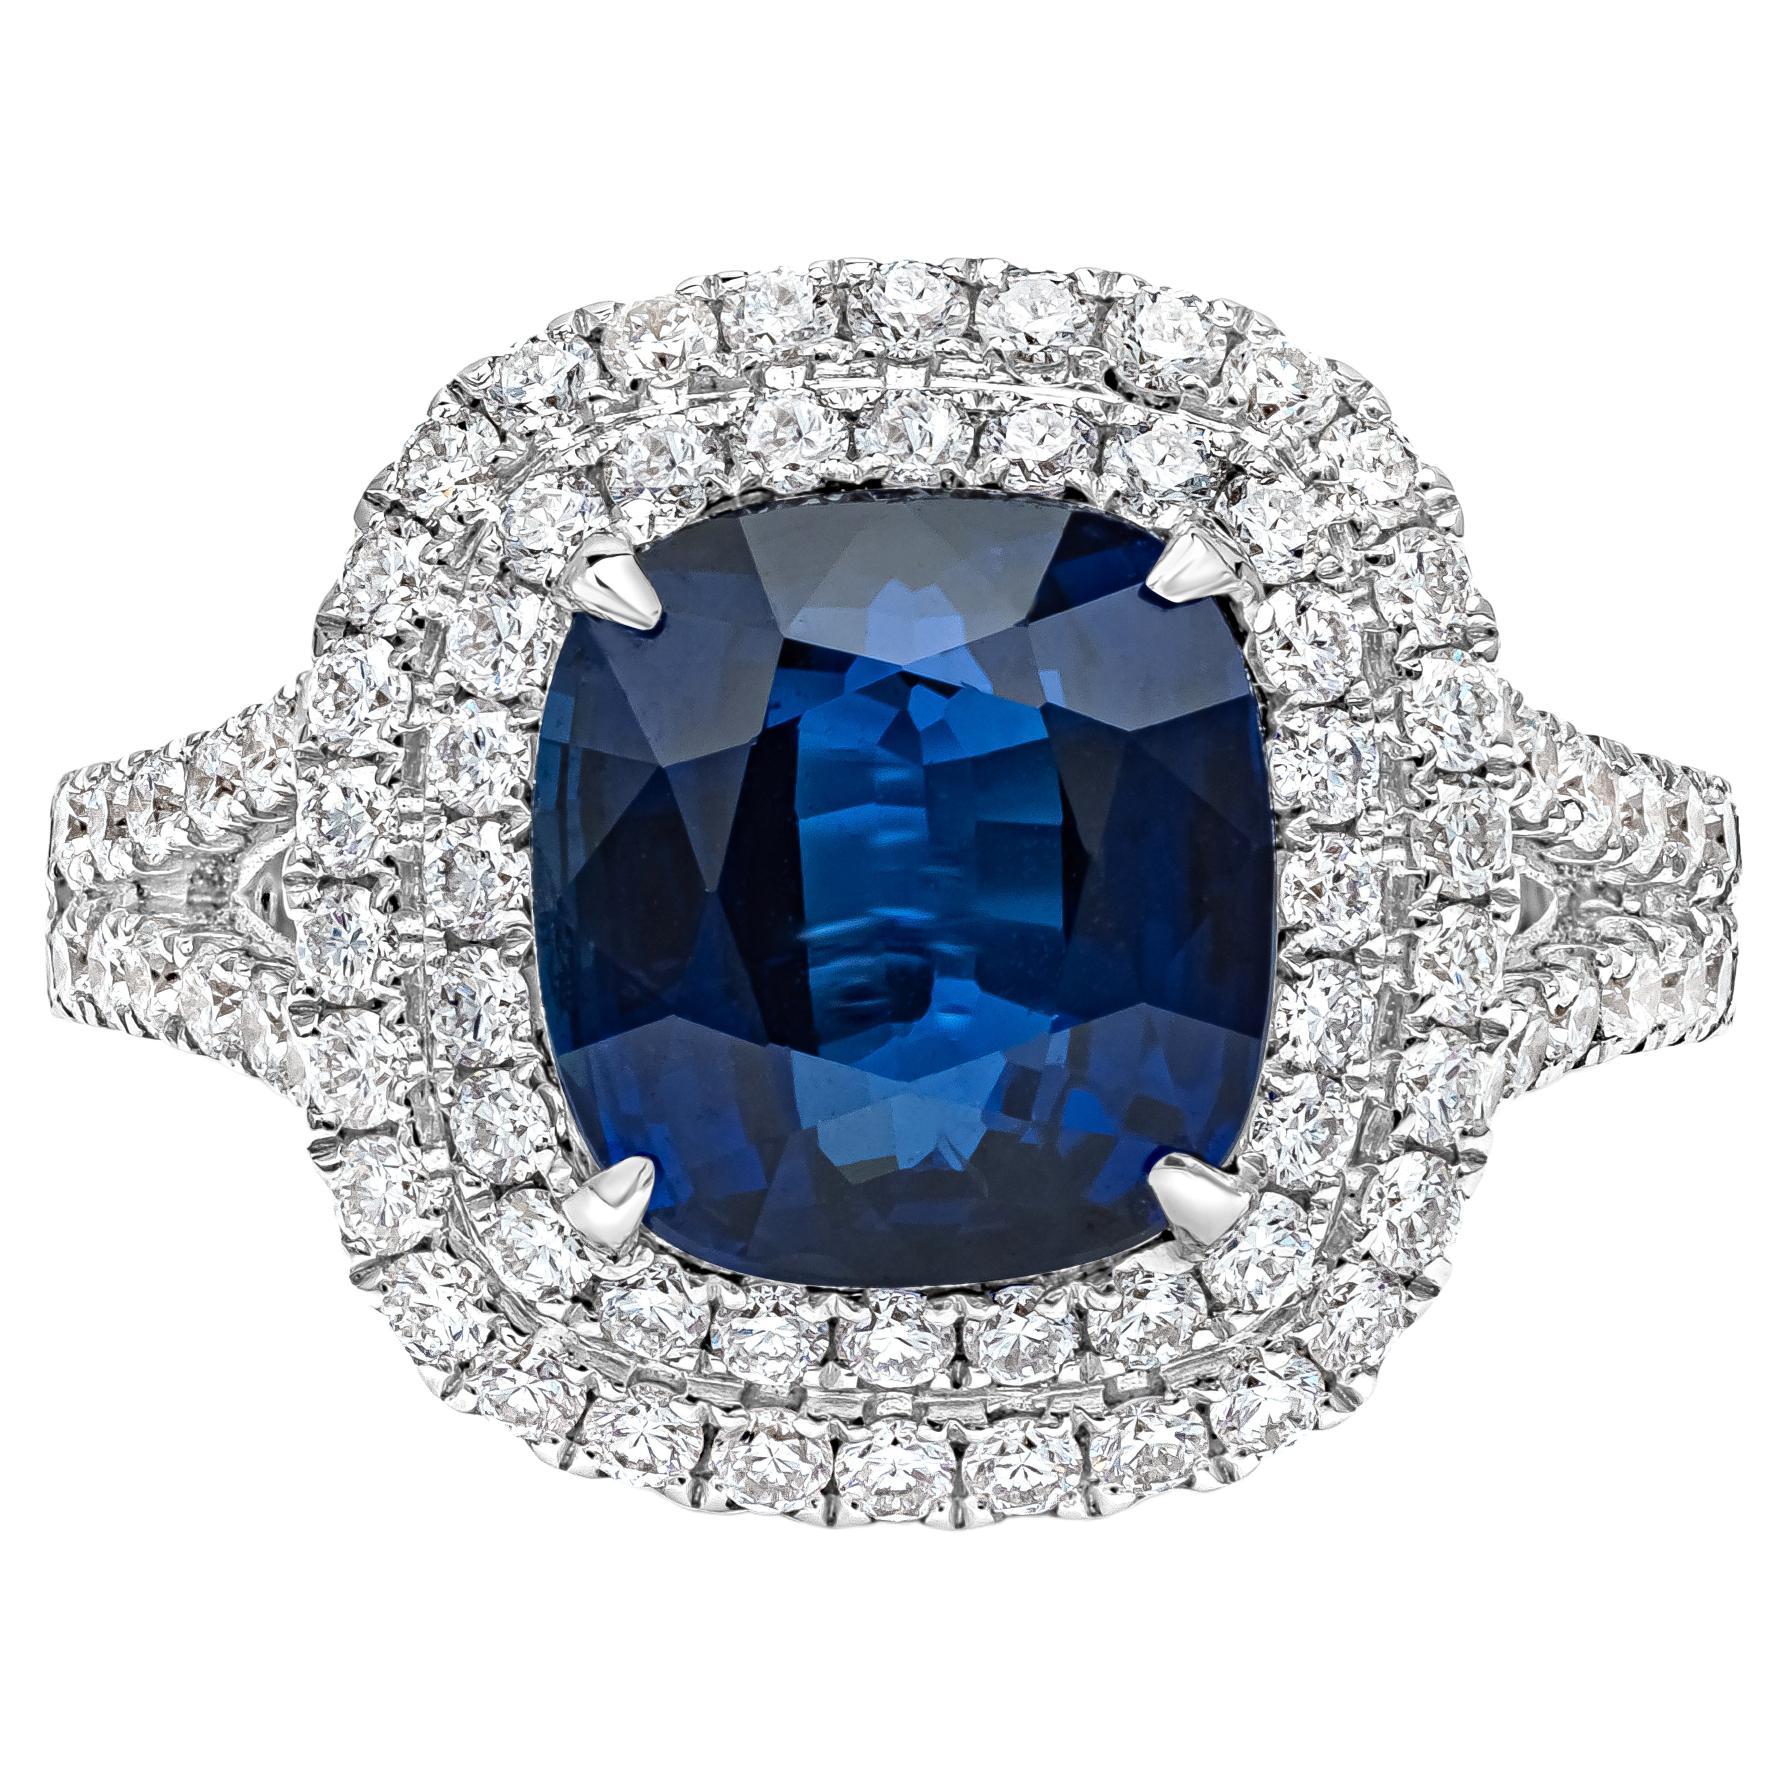 5.05 Carats Cushion Cut Blue Sapphire and Diamond Halo Engagement Ring For Sale